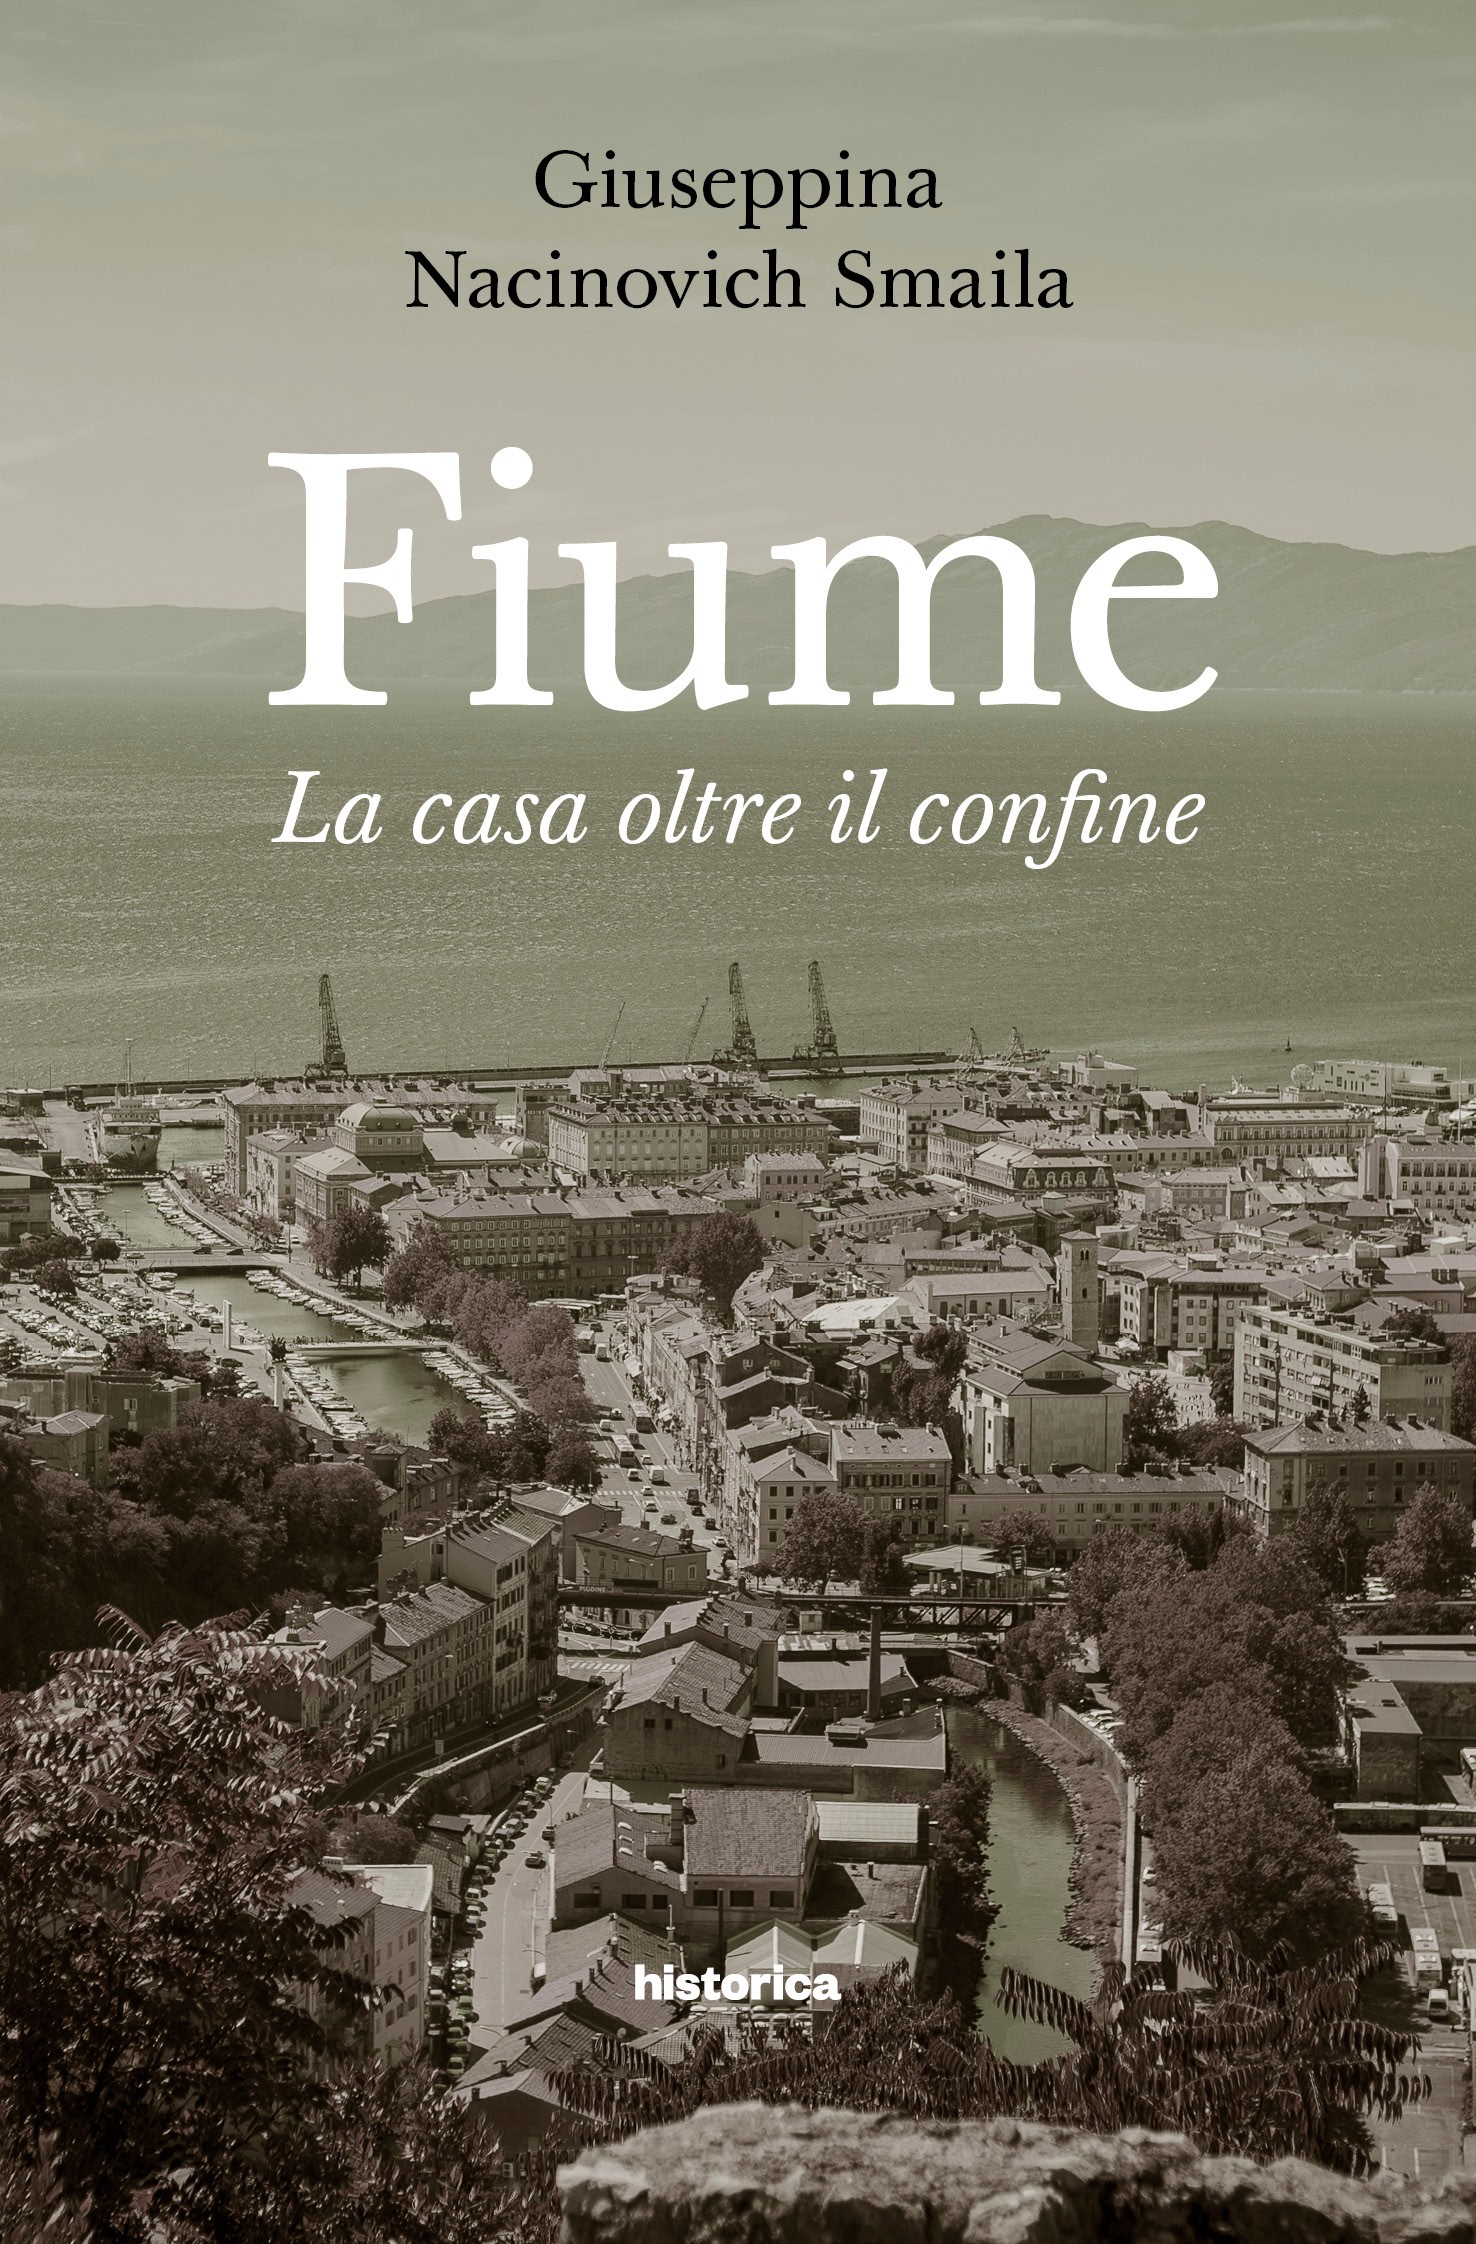 Fiume - Librerie.coop